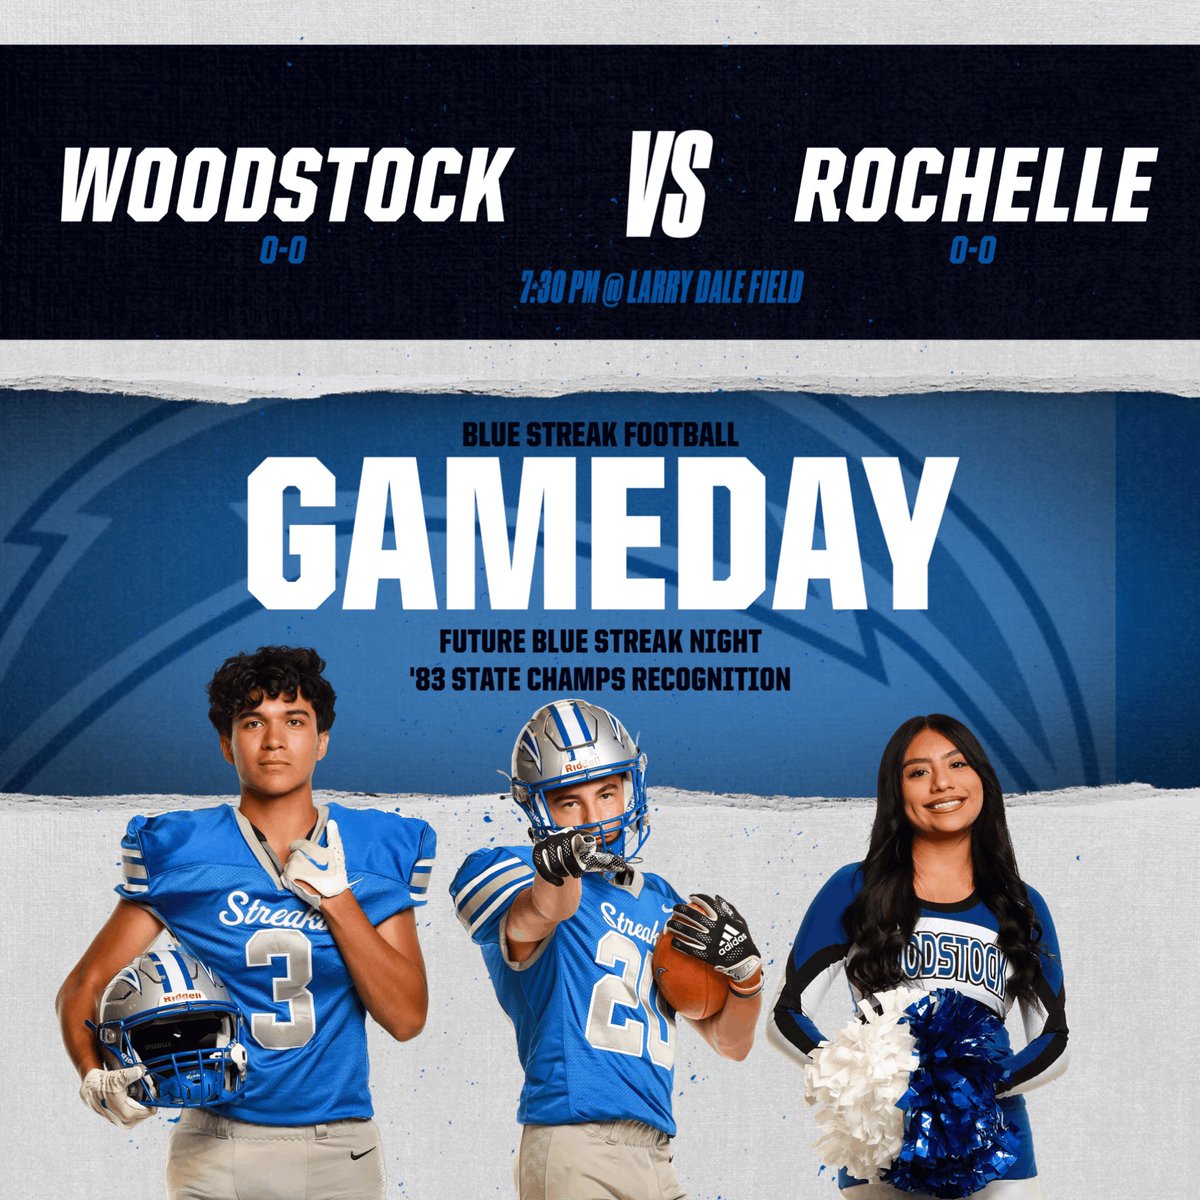 🗓️ FRIDAY, AUGUST 25th 🗓️
Check out our home events!

⚽️ JV1 vs. @Whip_PursSoccer (4:30 @ Creekside)
🏈 JV vs. @RTHS_Football (5:30 @ Larry Dale)
🏈 V vs. @RTHS_Football (7:30 @ Larry Dale)

@FBstreaks 

🤟💙⚡️